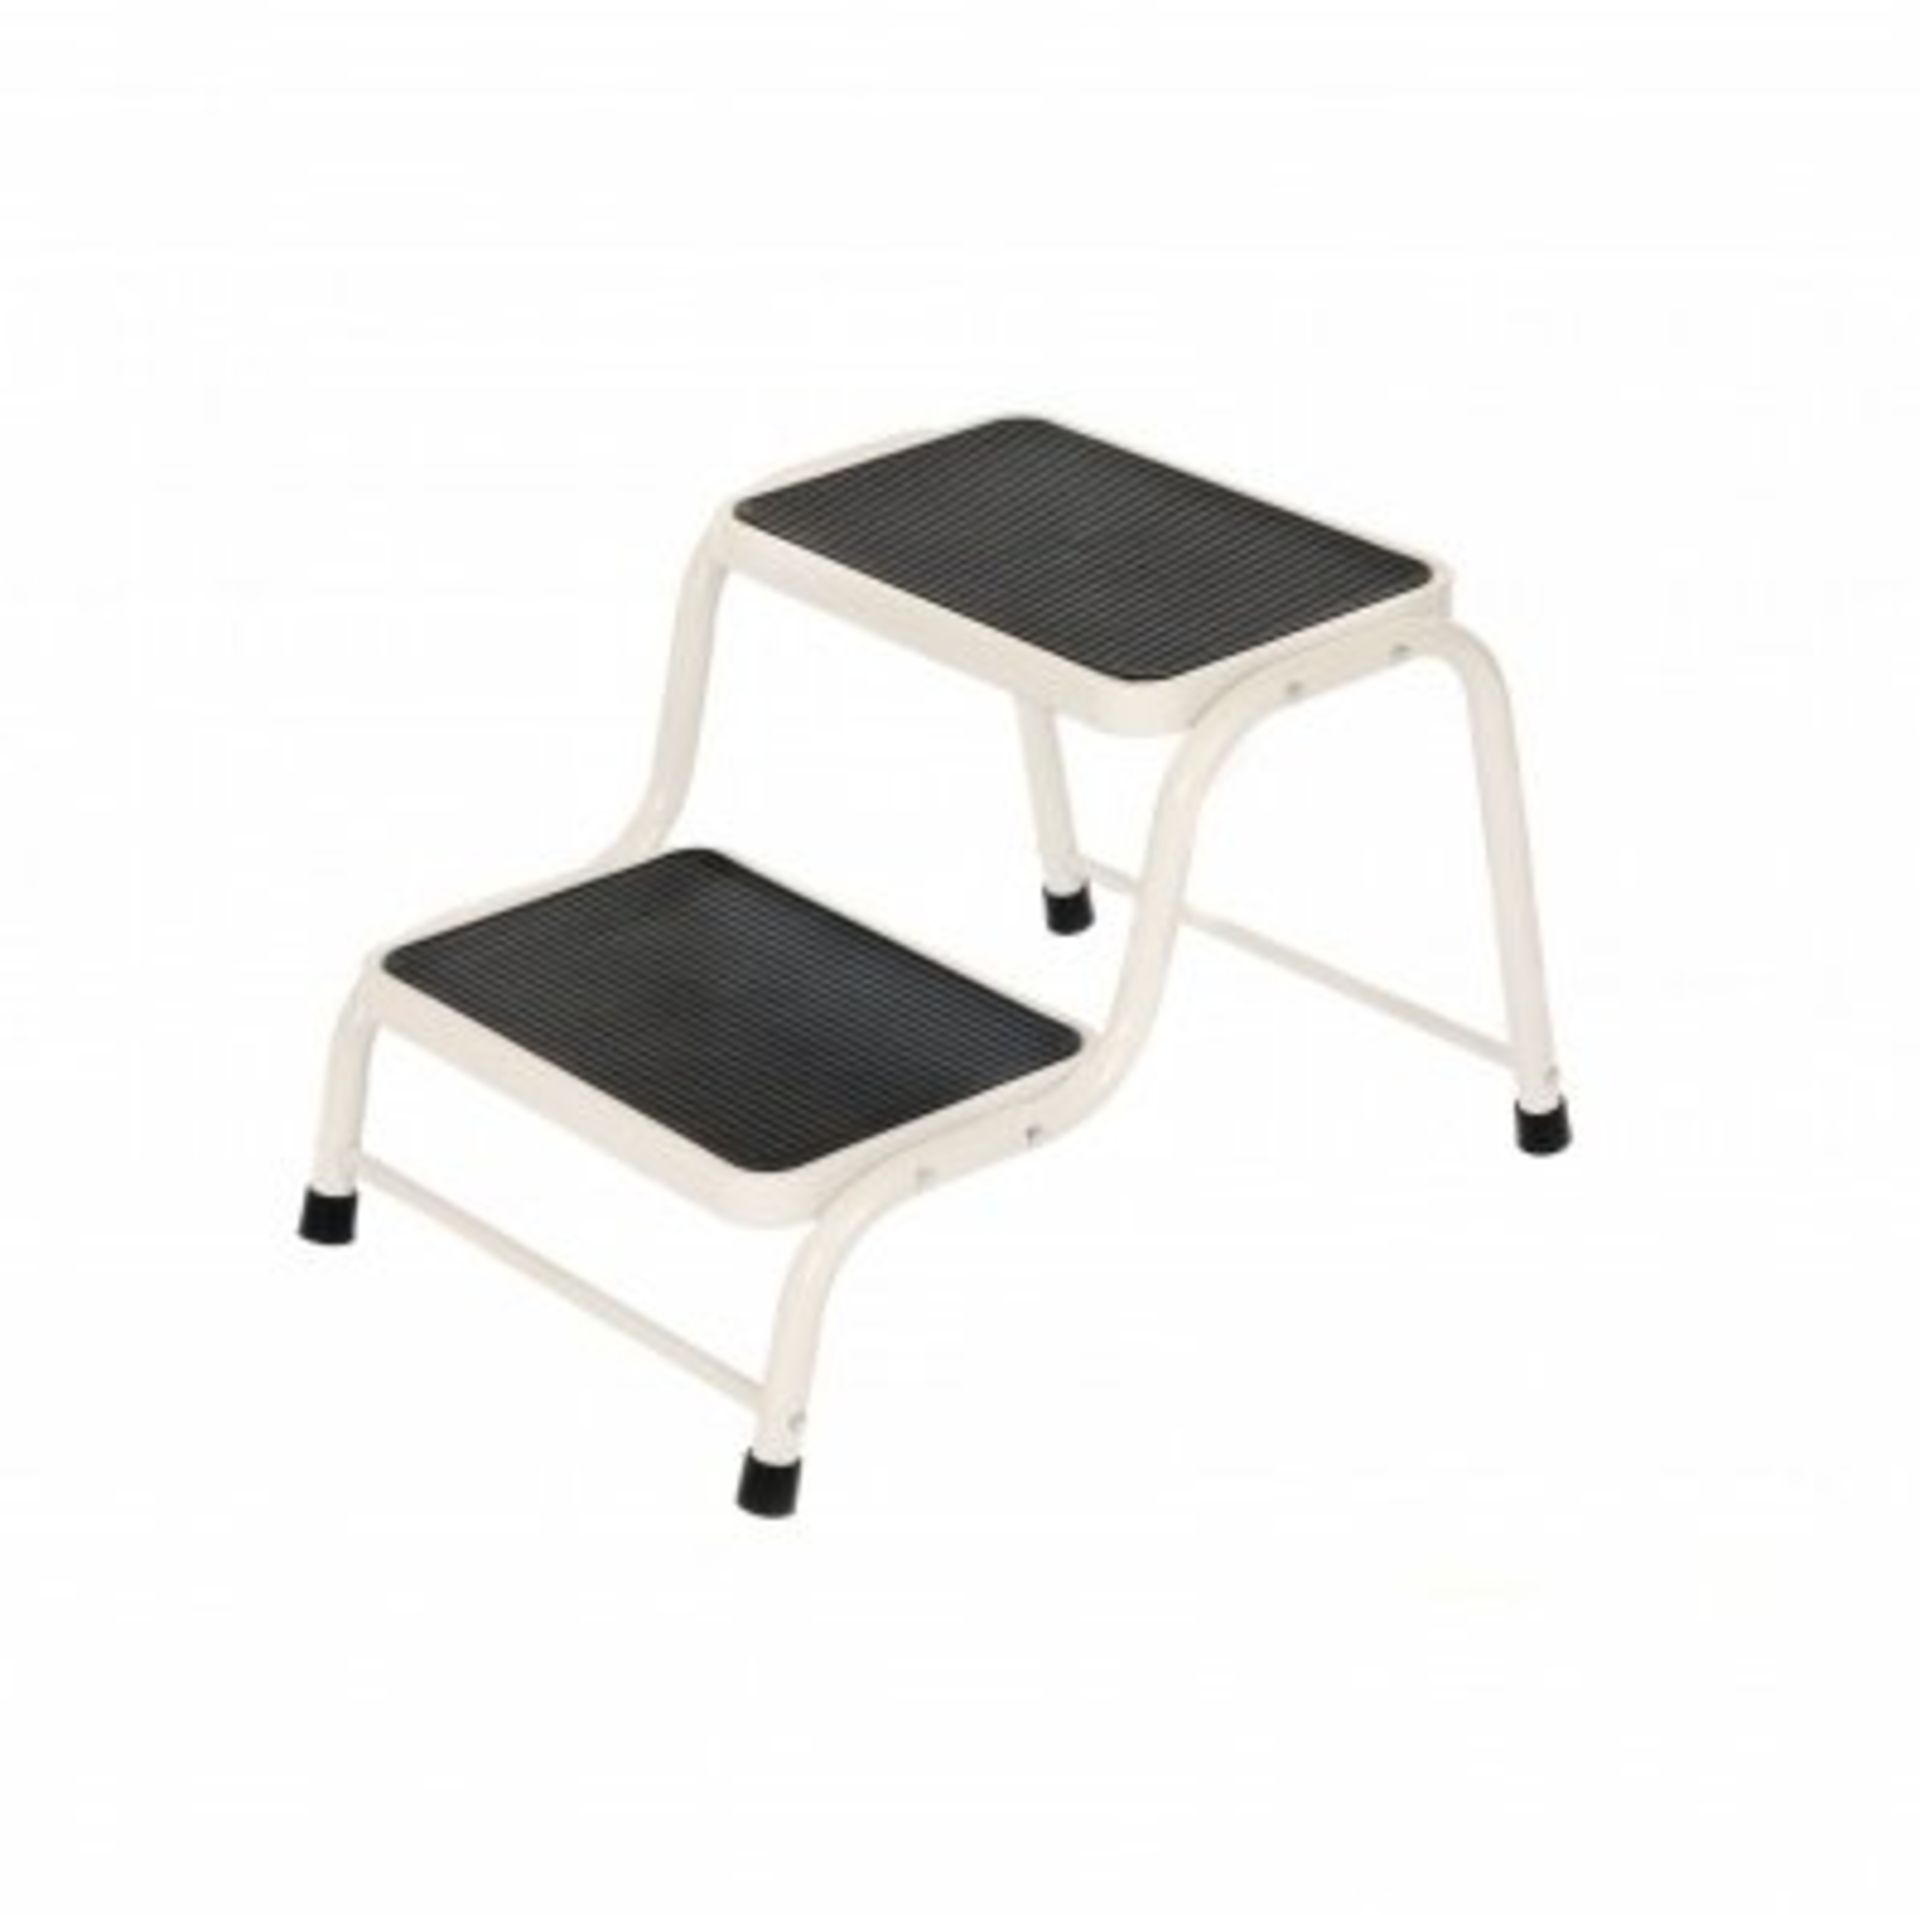 (RU7) Double Caravan Step Stool Steel Non Slip Rubber Tread Safety The double steps are idea...